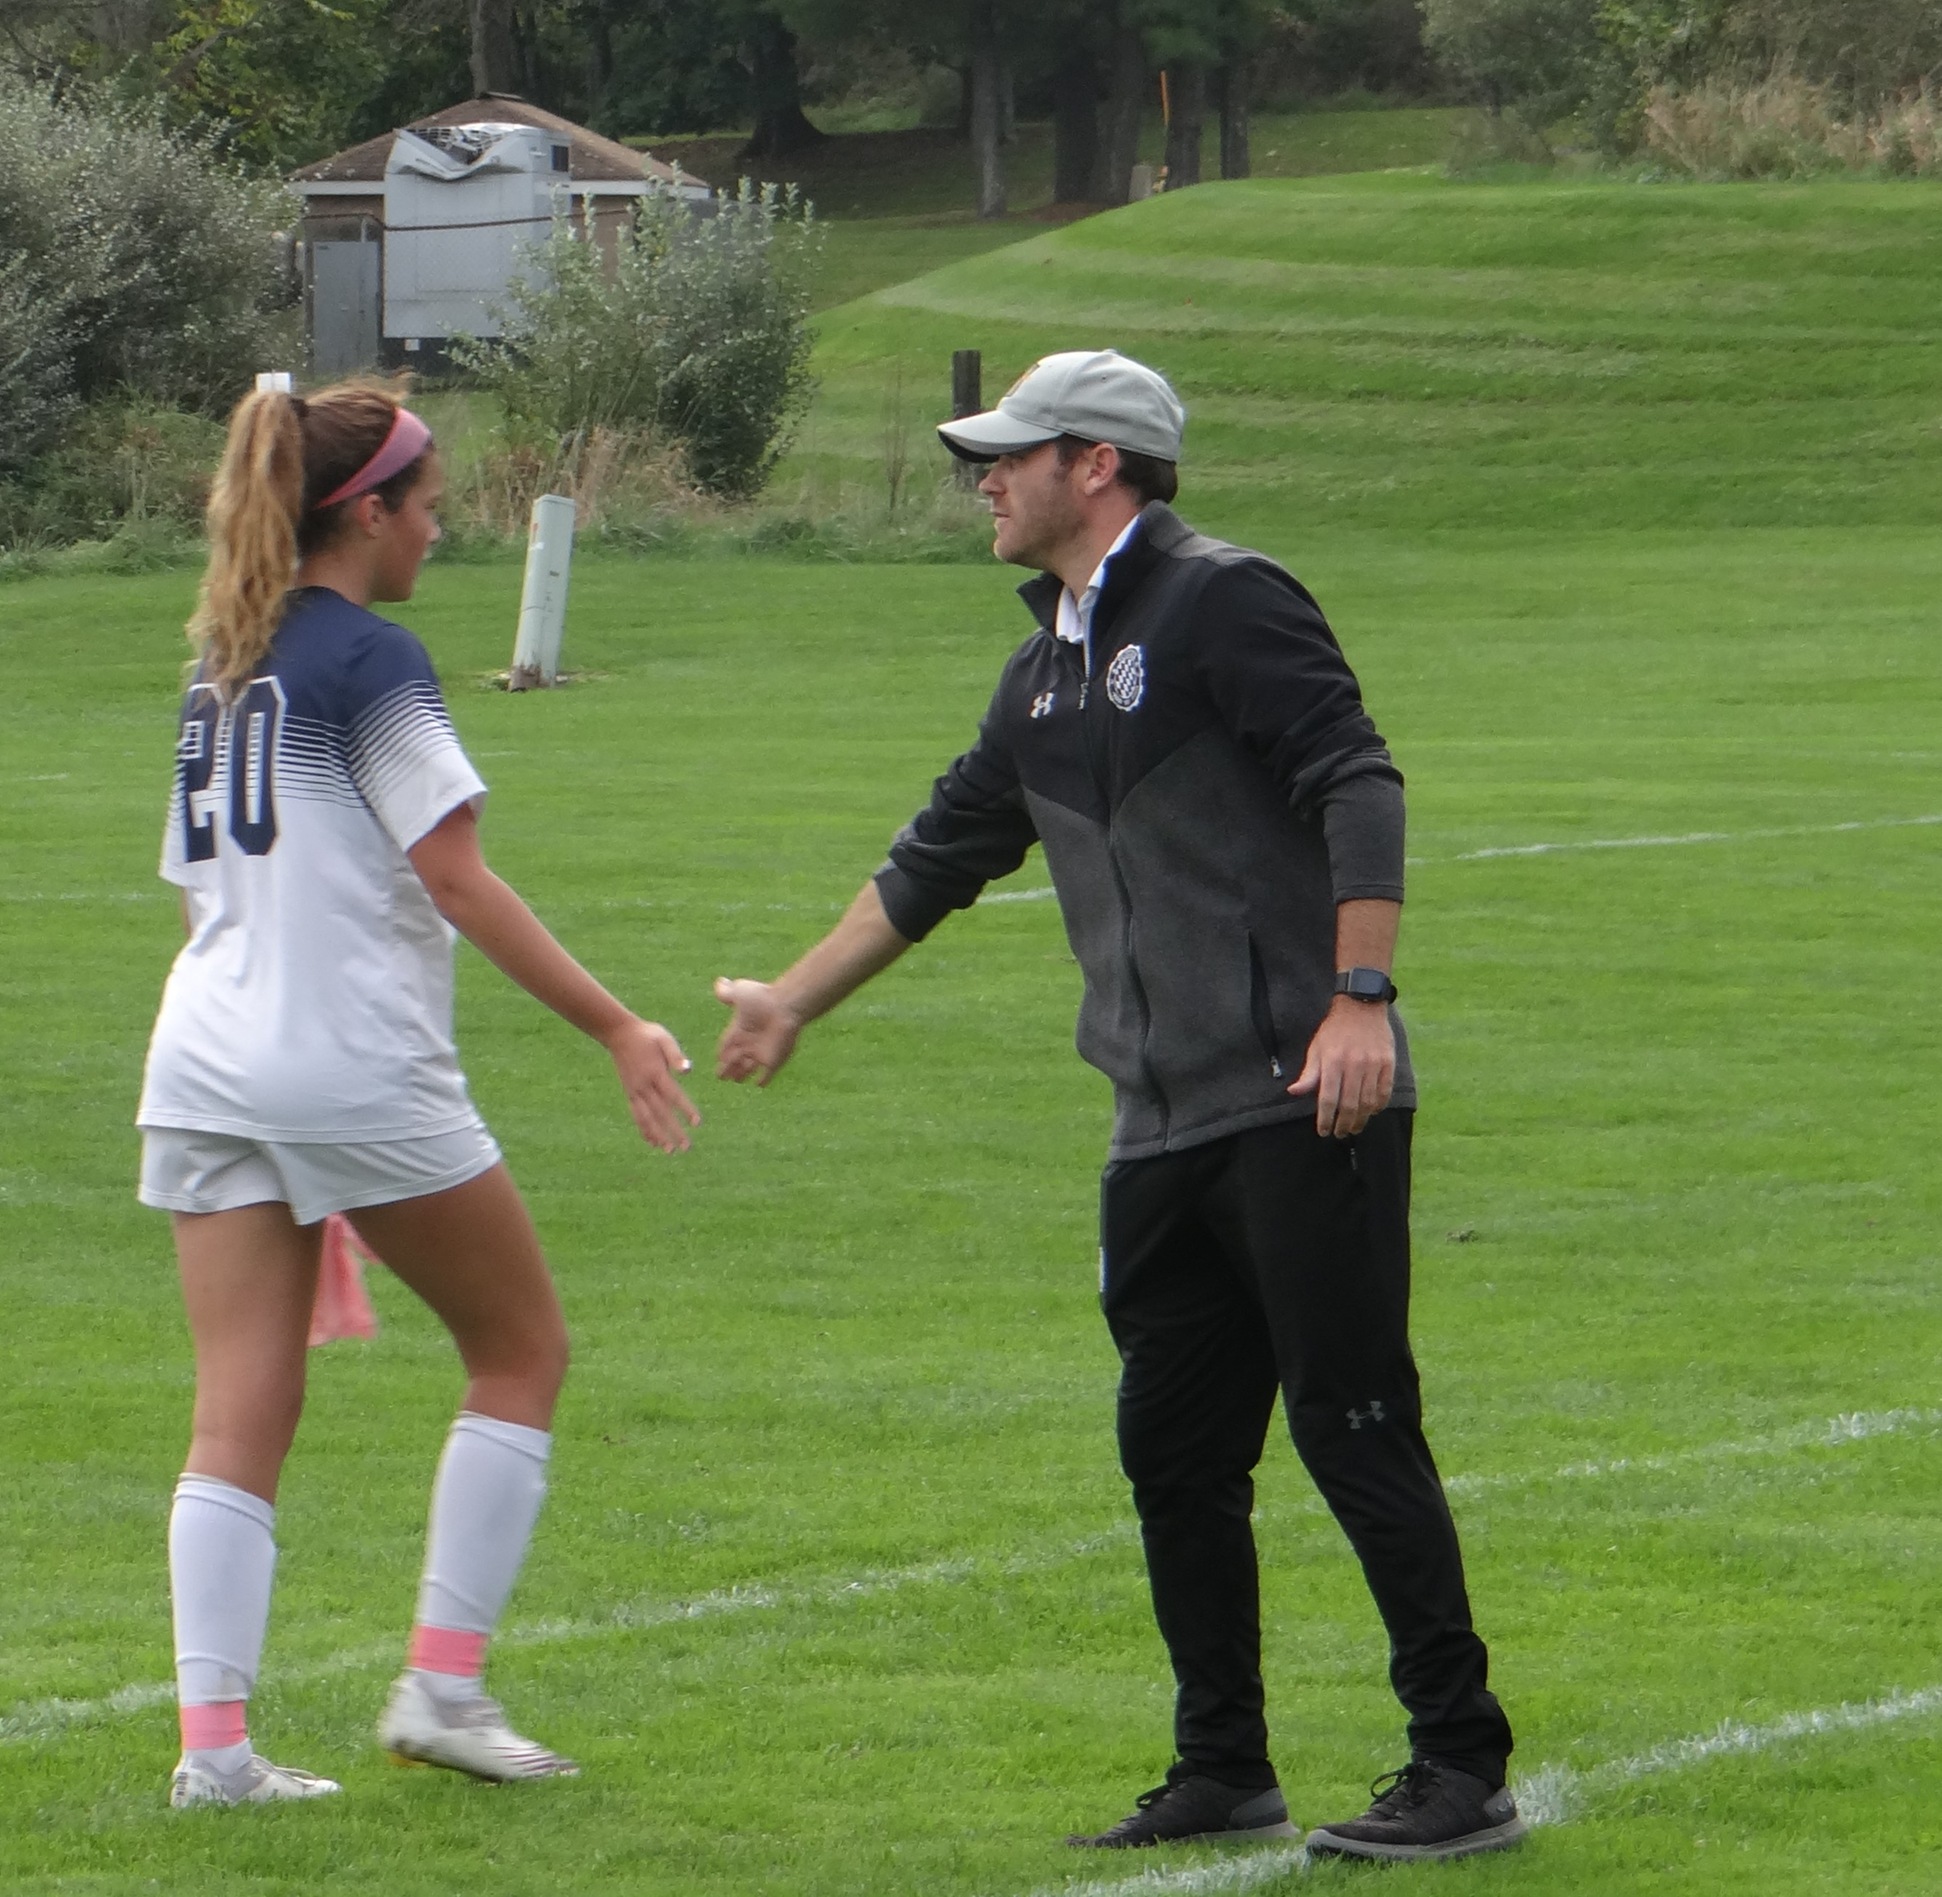 Rath Named as Head Coach for Women's Soccer